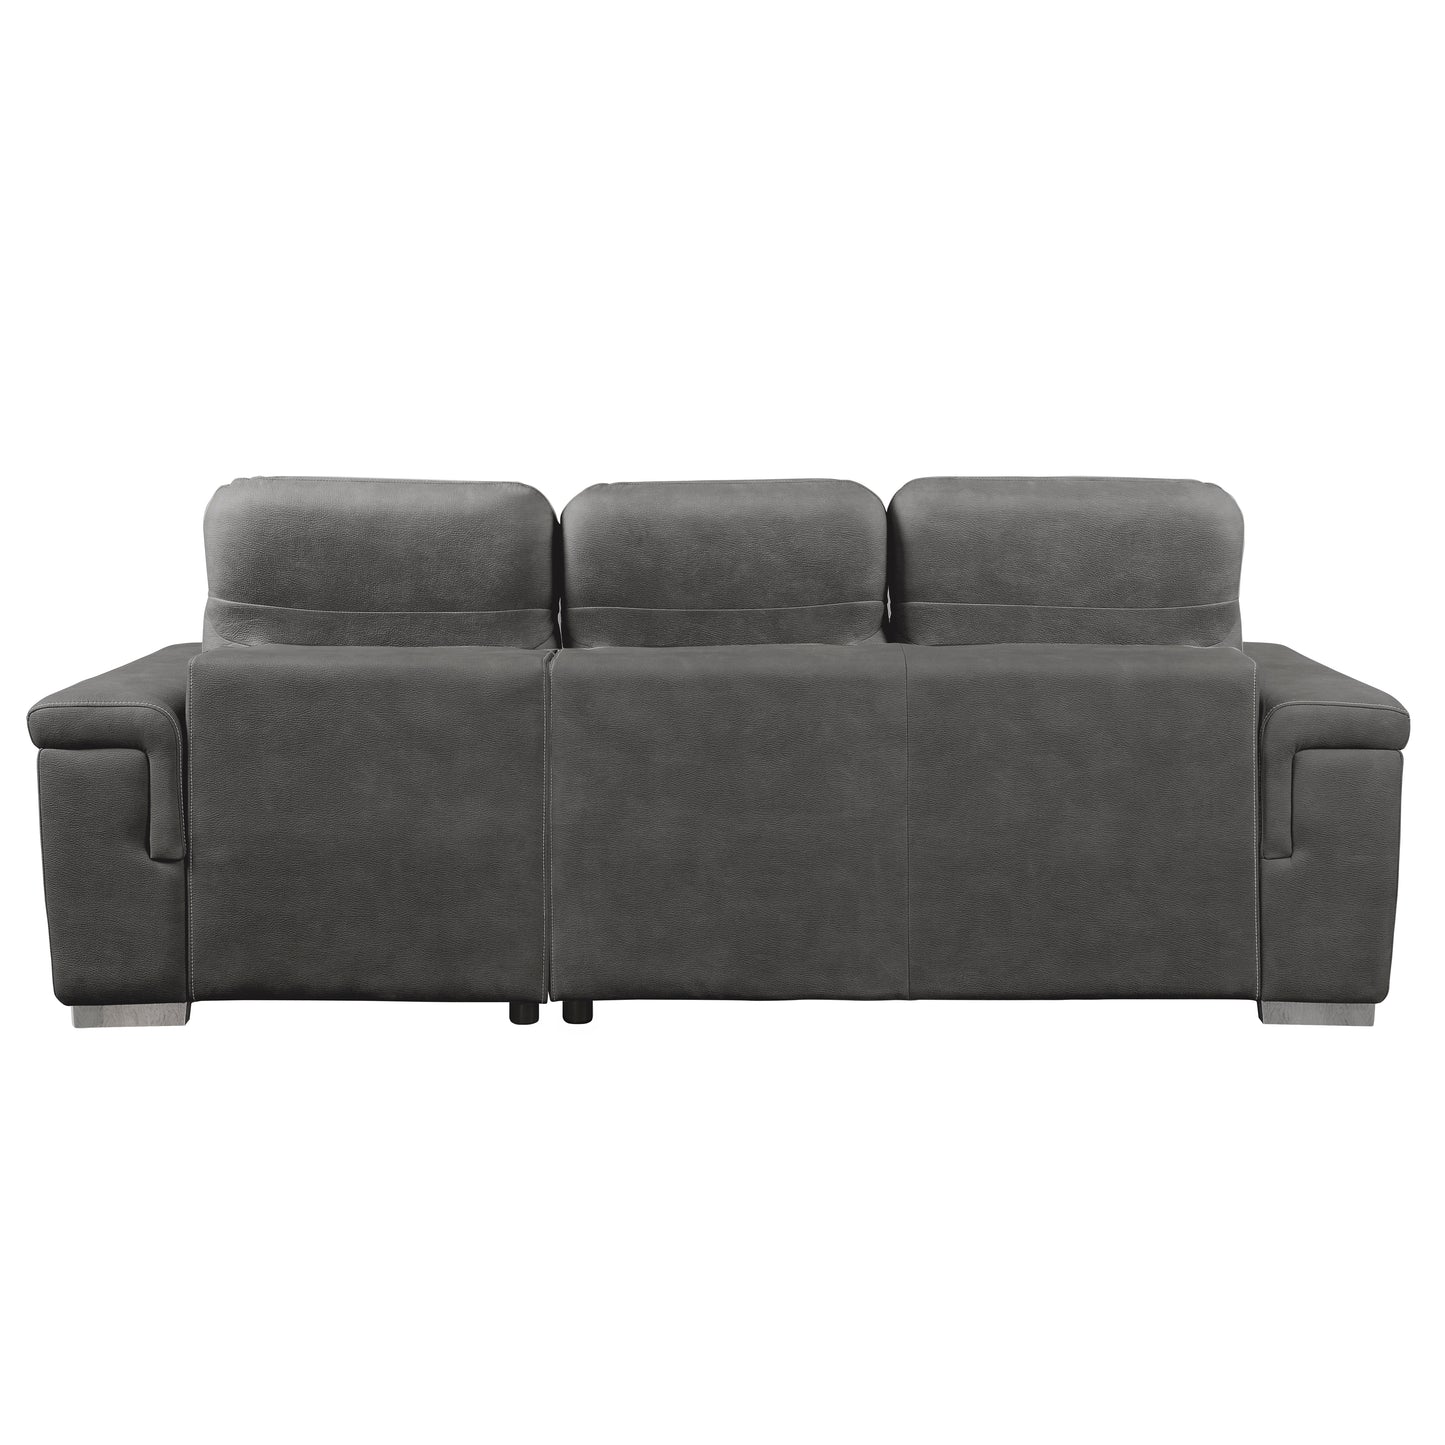 Alfio 2-Pcs Sectional w/ Adj. Headrests, Pull-out Bed & Right Chaise w/ Hidden Storage GREY